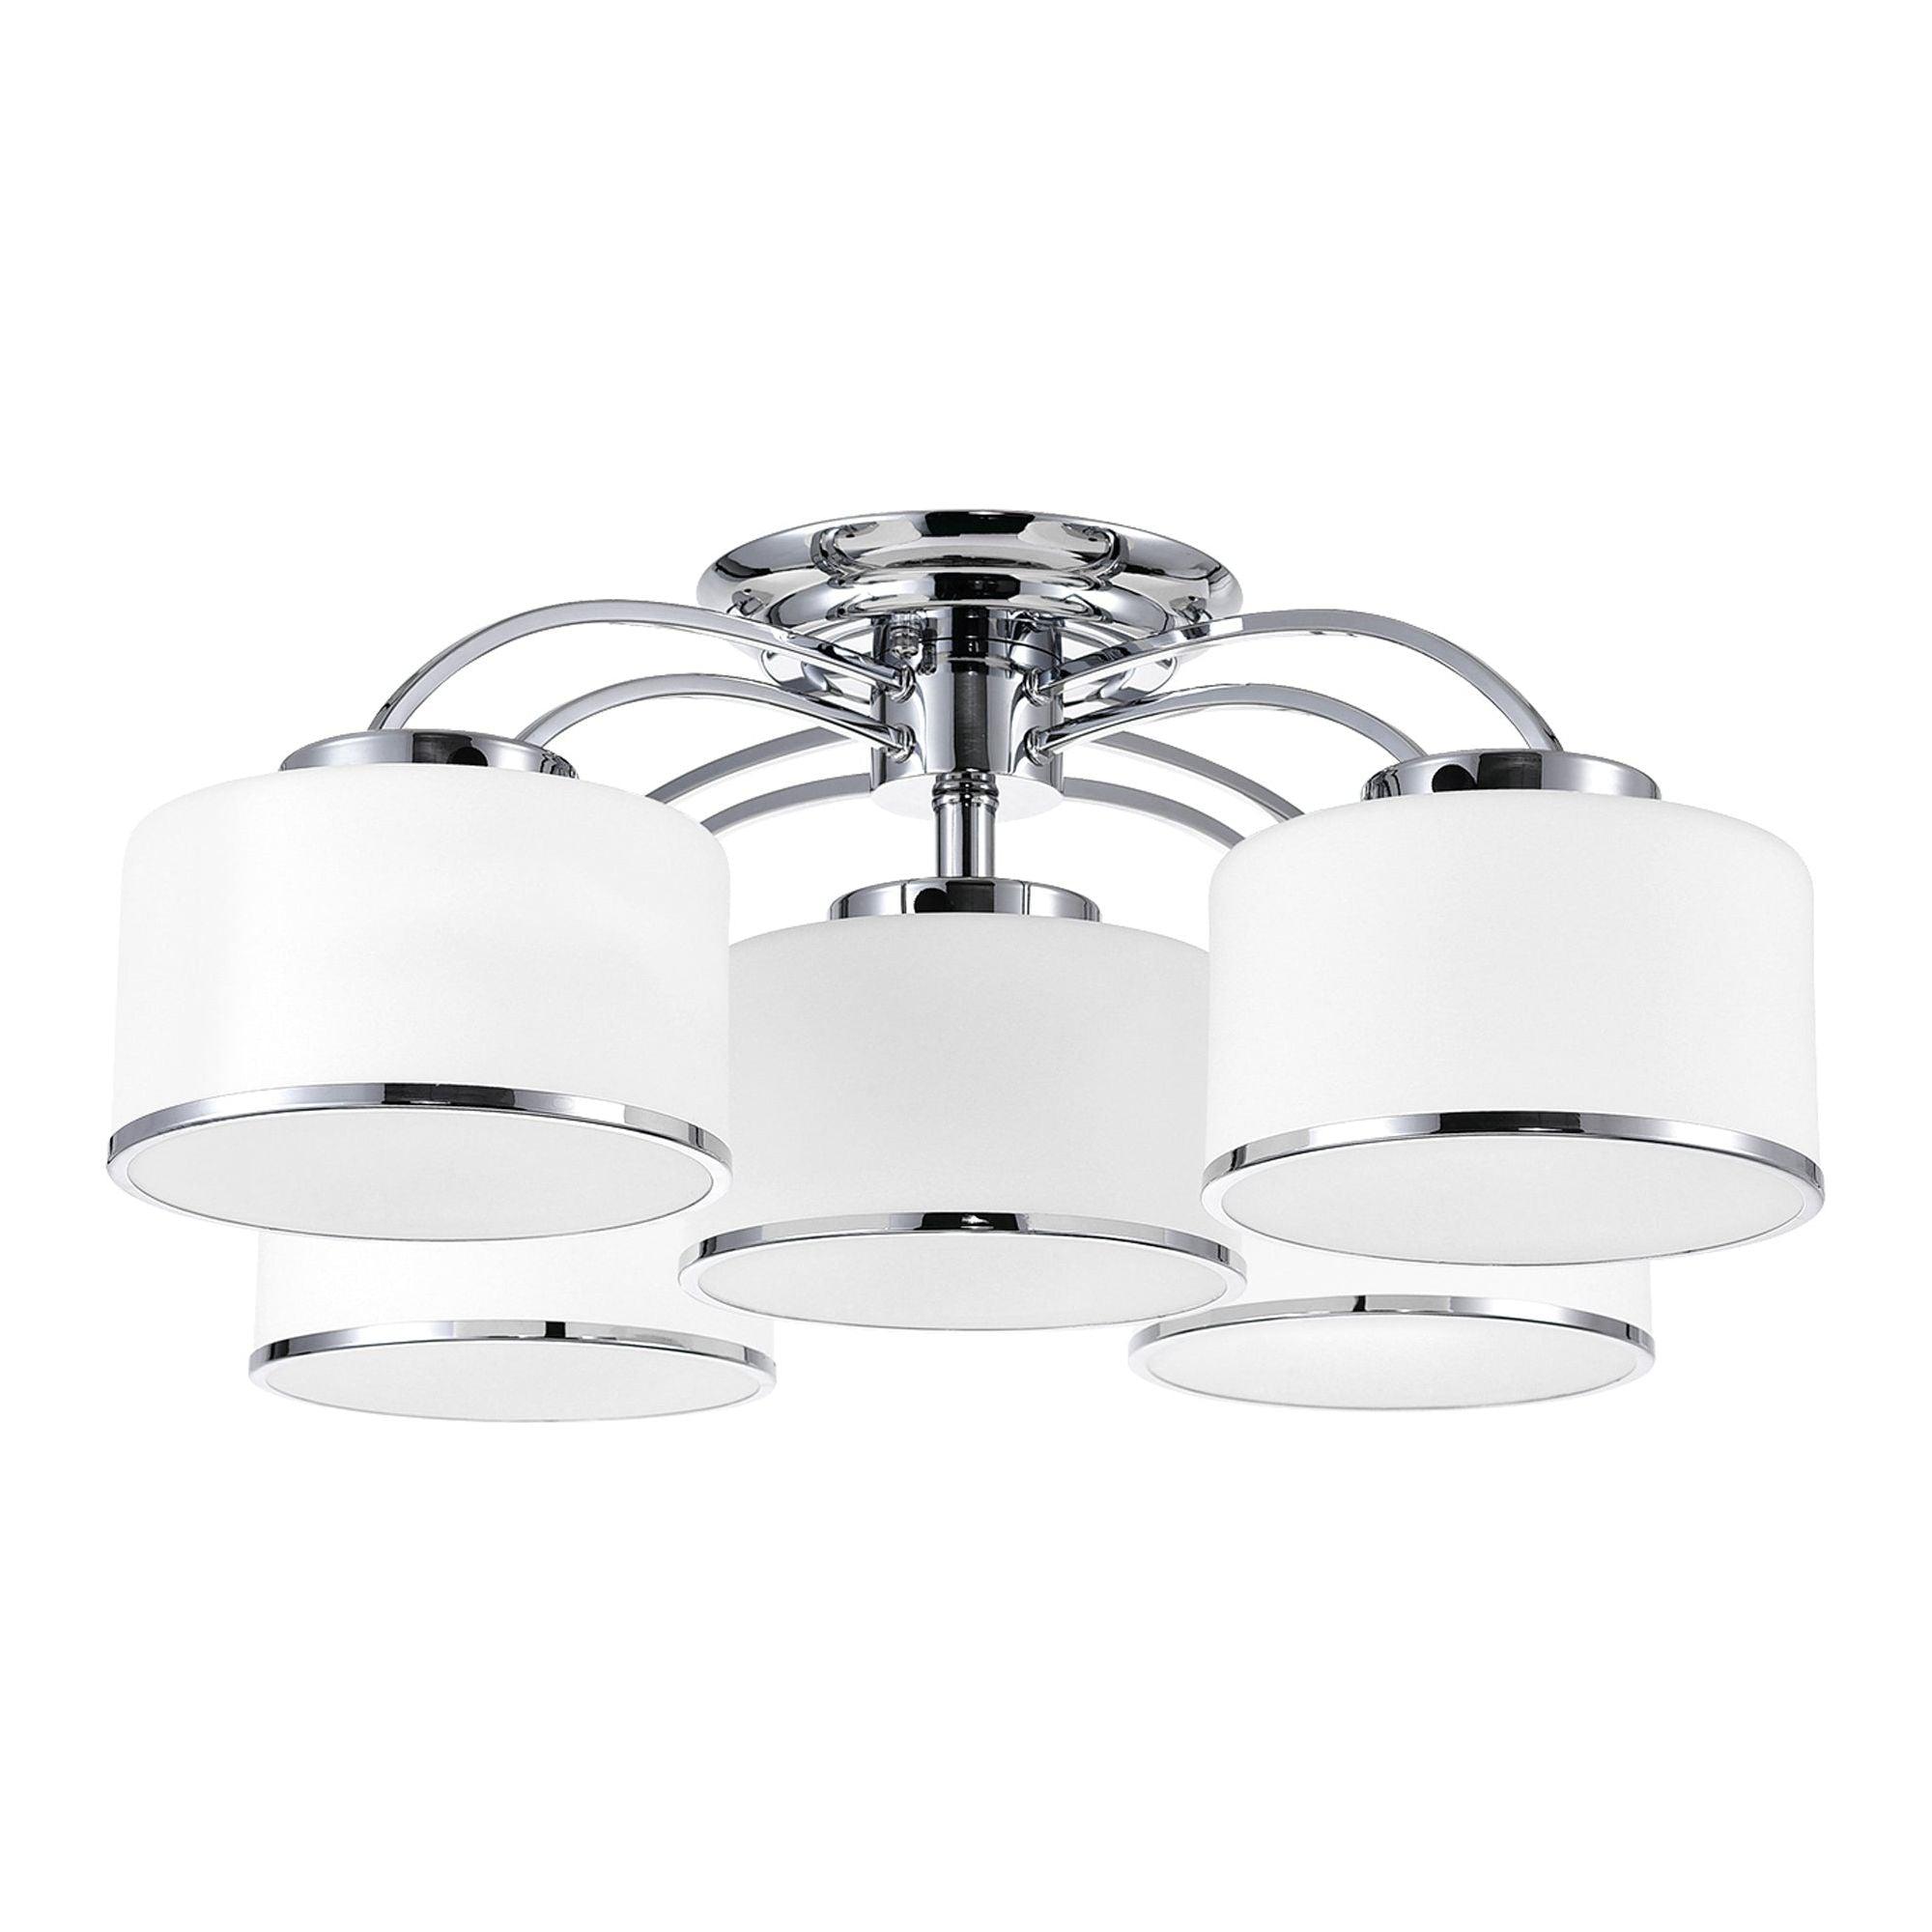 CWI - Frosted Semi Flush Mount - Lights Canada